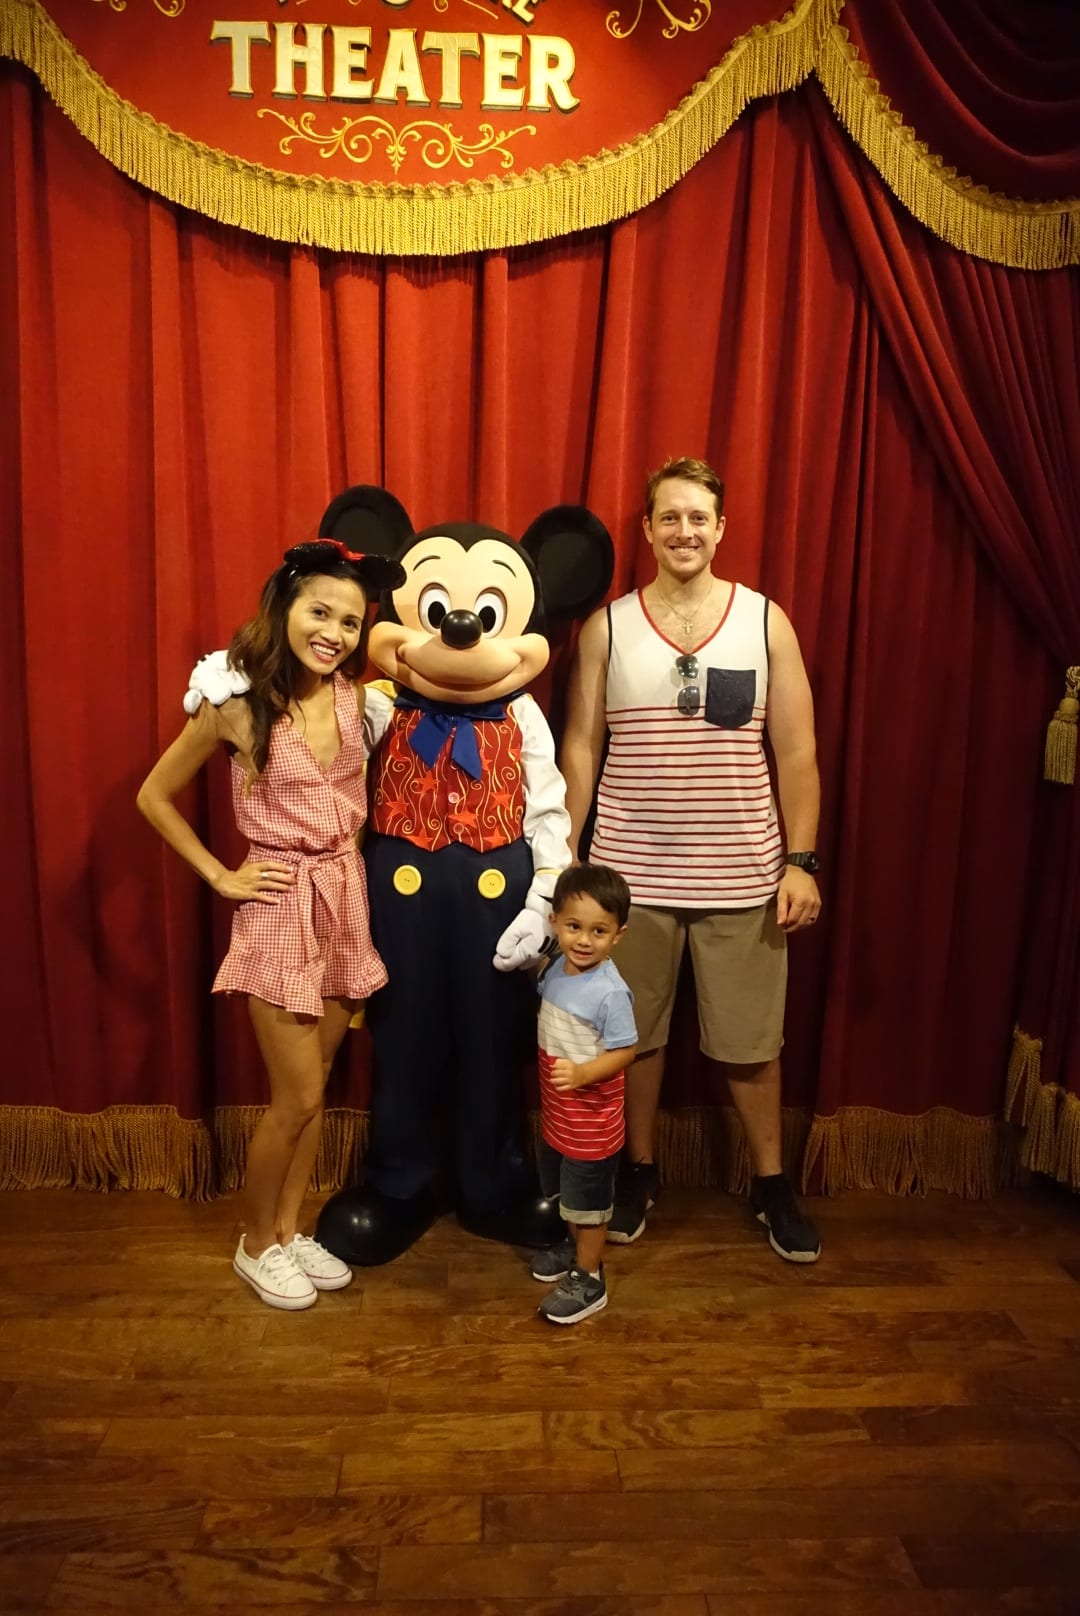 DISNEY WITH A TODDLER, TIPS FOR FAMILIES VISITING DISNEY, DISNEY WORLD, WHAT TO DO IN DISNEY WORLD, VISITING DISNEY WORLD, FIRST TIME IN DISNEY WORLD, VISITING DISNEY WORLD WITH A TODDLER, Mickey Mouse, Mickey Mouse THEATRE 